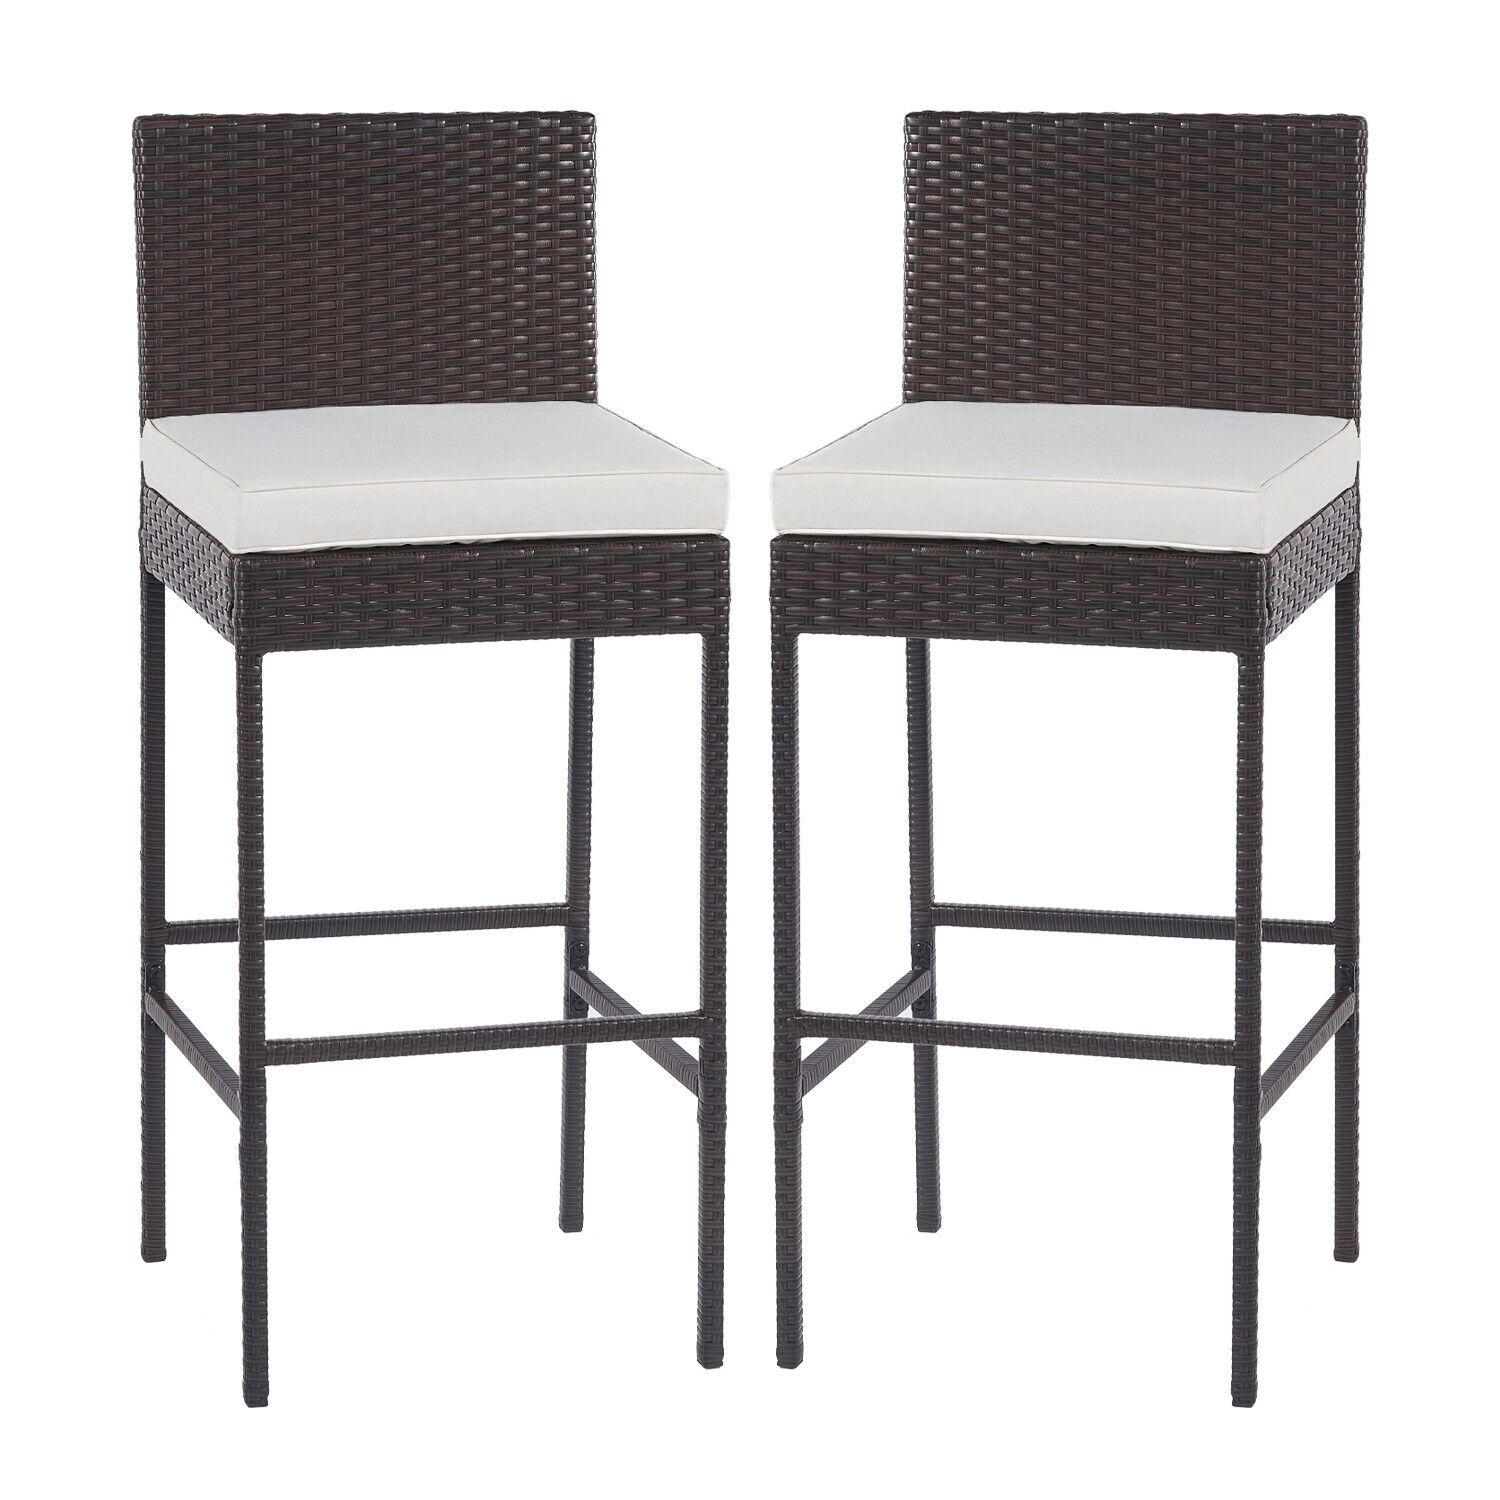 2pcs Outdoor Wicker Rattan Barstool with Footrest and Cushion Patio Furniture